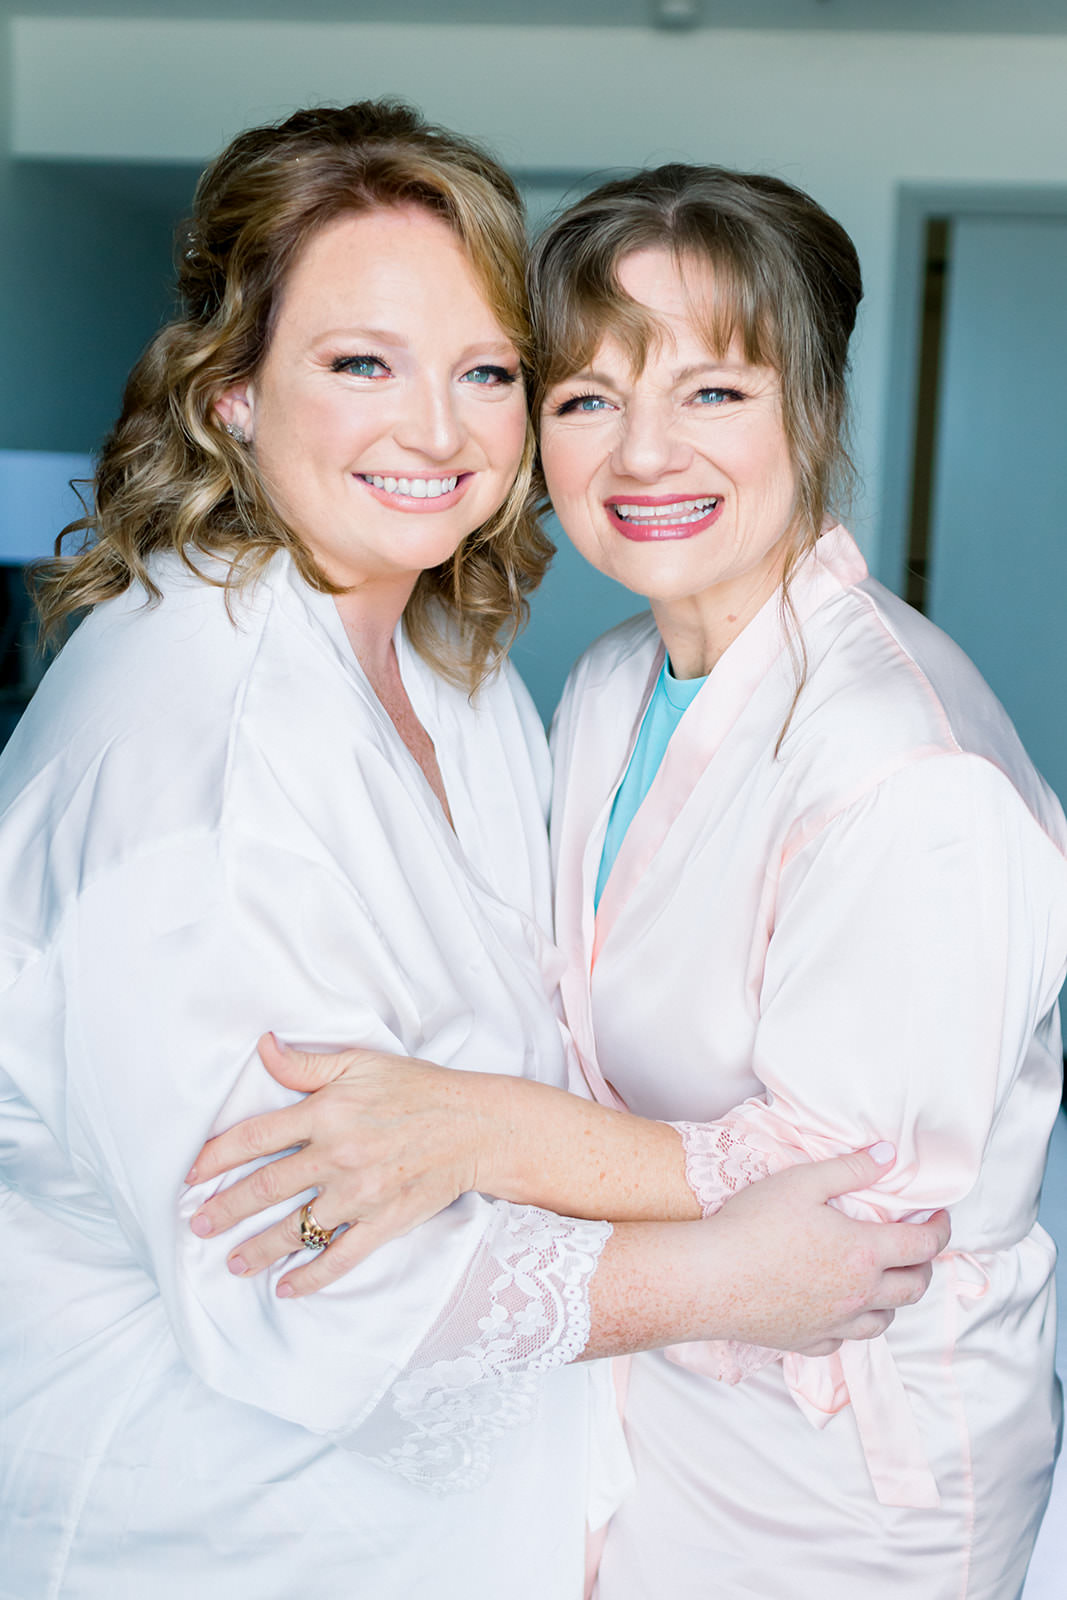 Bride with Mother Getting Ready Wedding Portrait | Tampa Bay Wedding Photographer Shauna and Jordon Photography